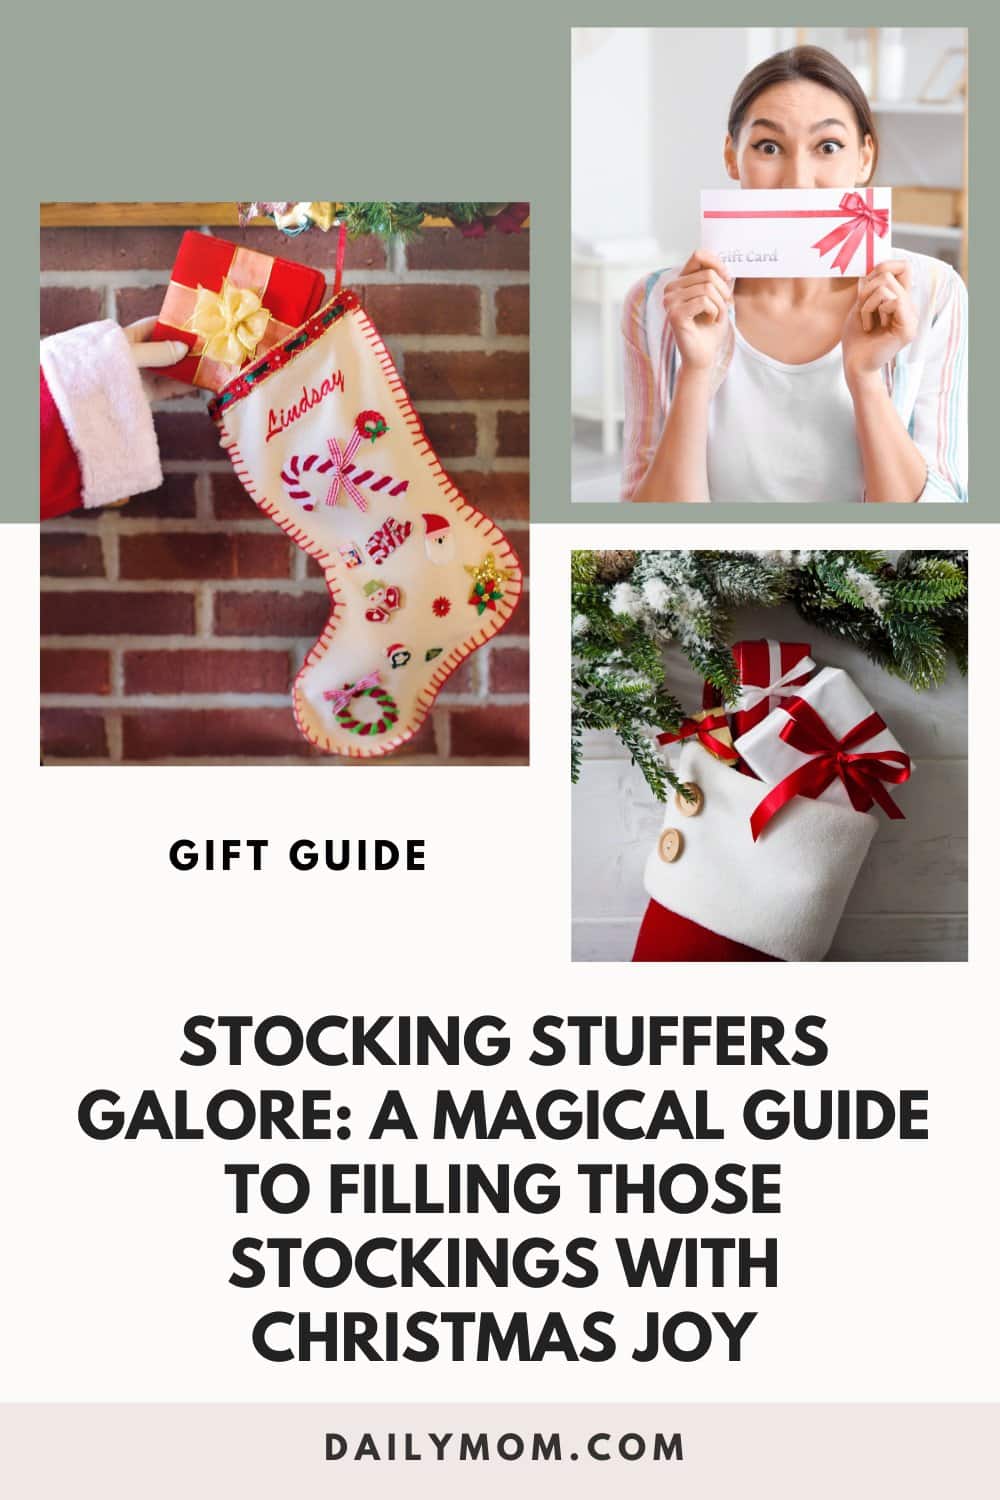 26 Amazing Stocking Stuffers: A Magical Guide To Filling Those Stockings With Christmas Joy 74 Daily Mom, Magazine For Families